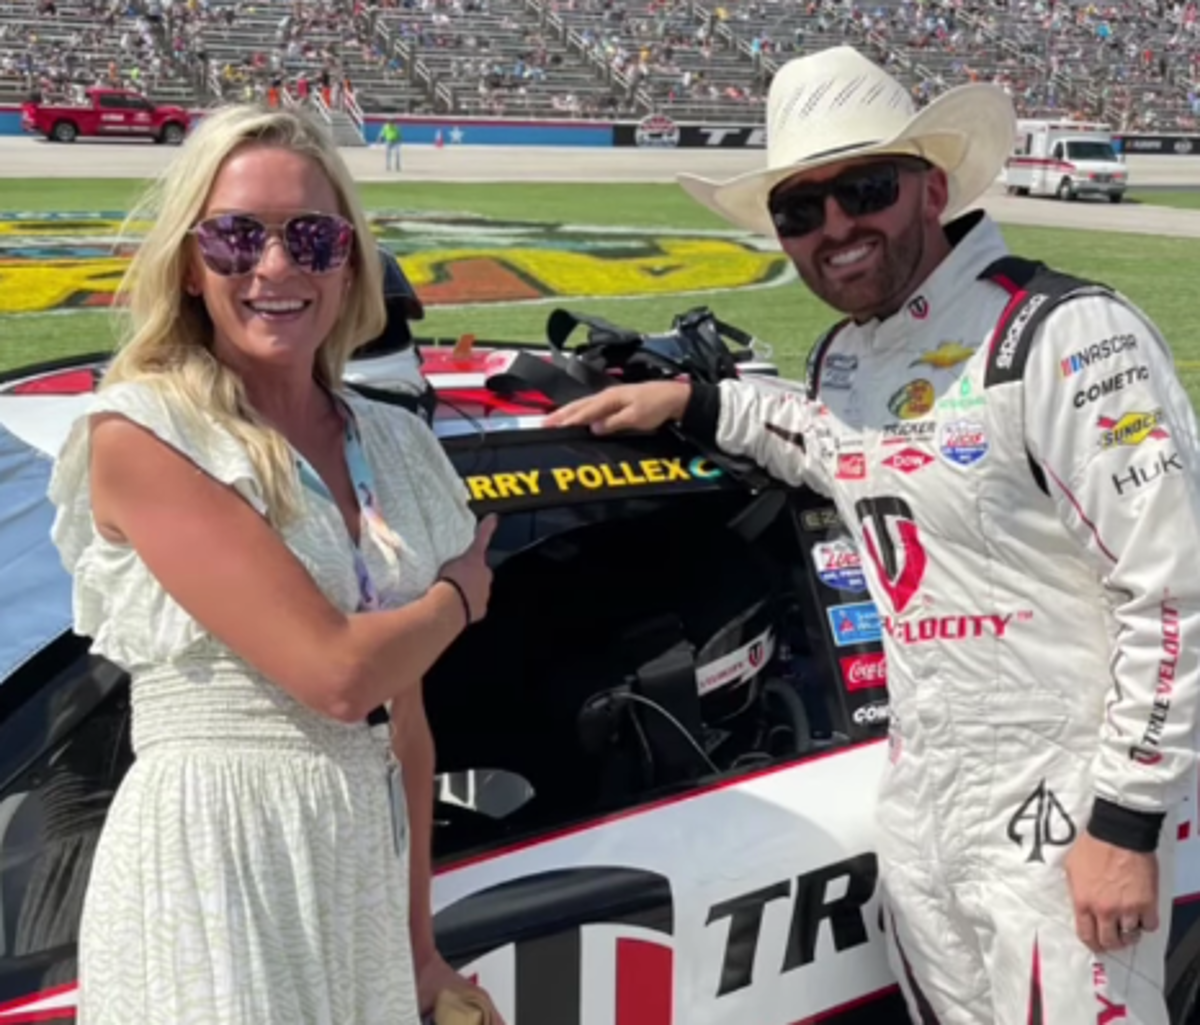 Sherry Pollex poses with Austin Dillon.